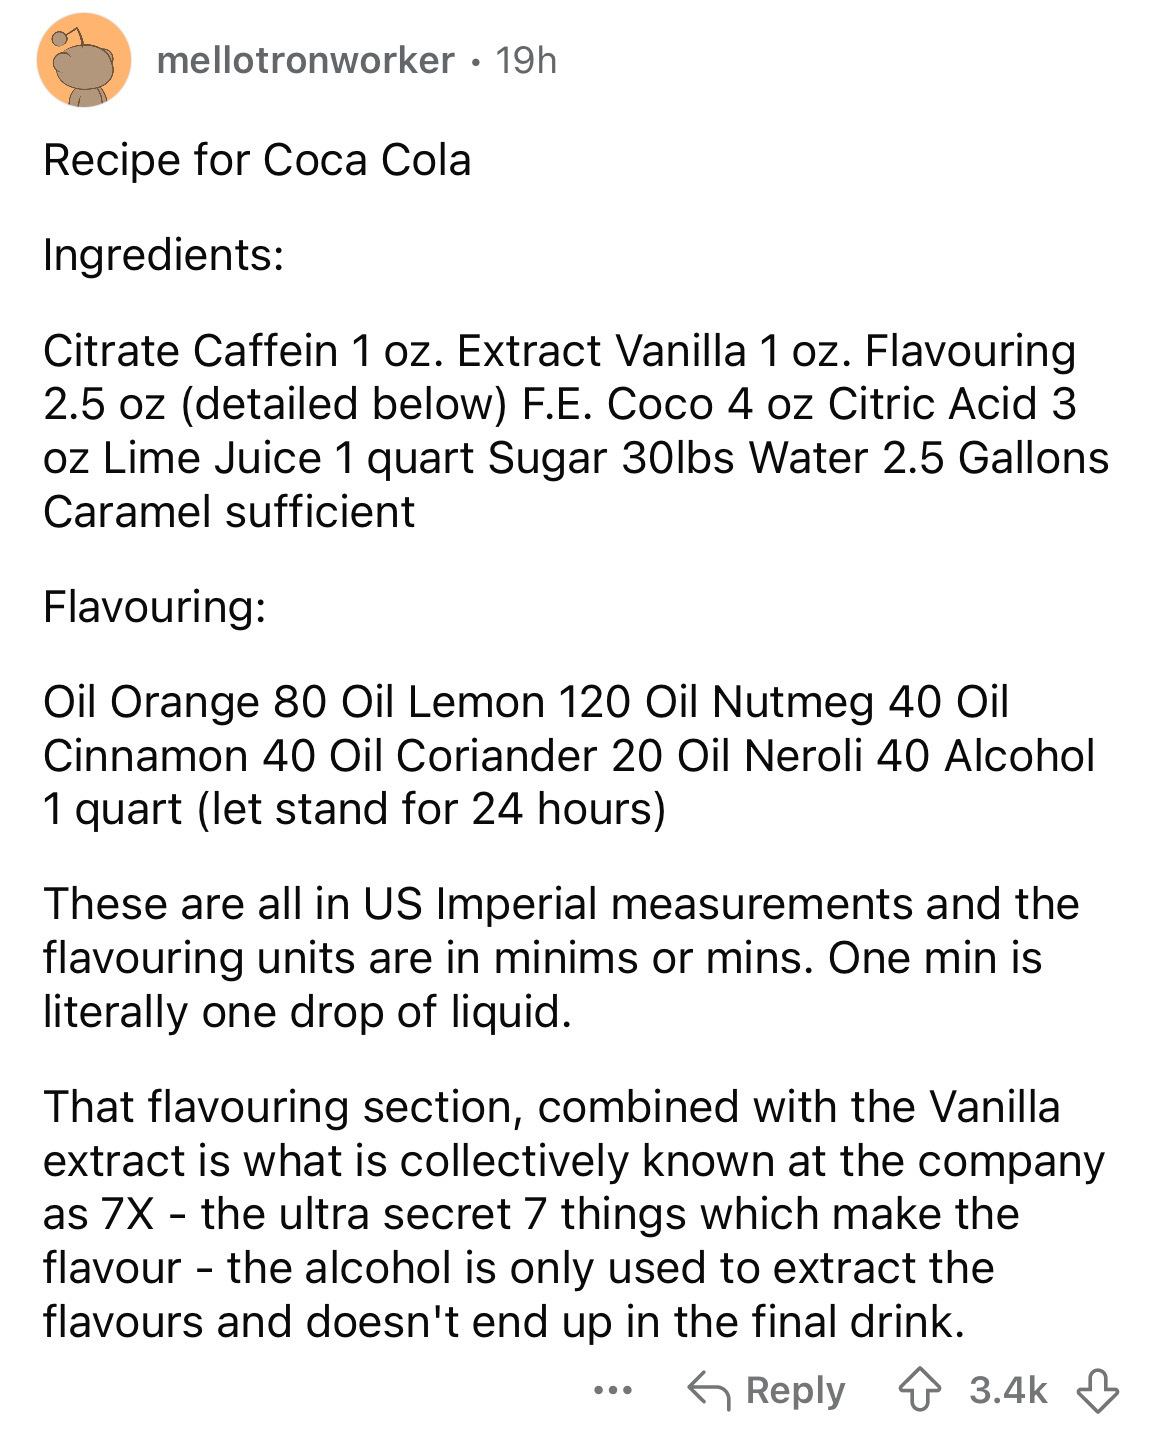 document - mellotronworker 19h Recipe for Coca Cola Ingredients Citrate Caffein 1 oz. Extract Vanilla 1 oz. Flavouring 2.5 oz detailed below F.E. Coco 4 oz Citric Acid 3 oz Lime Juice 1 quart Sugar 30lbs Water 2.5 Gallons Caramel sufficient Flavouring Oil